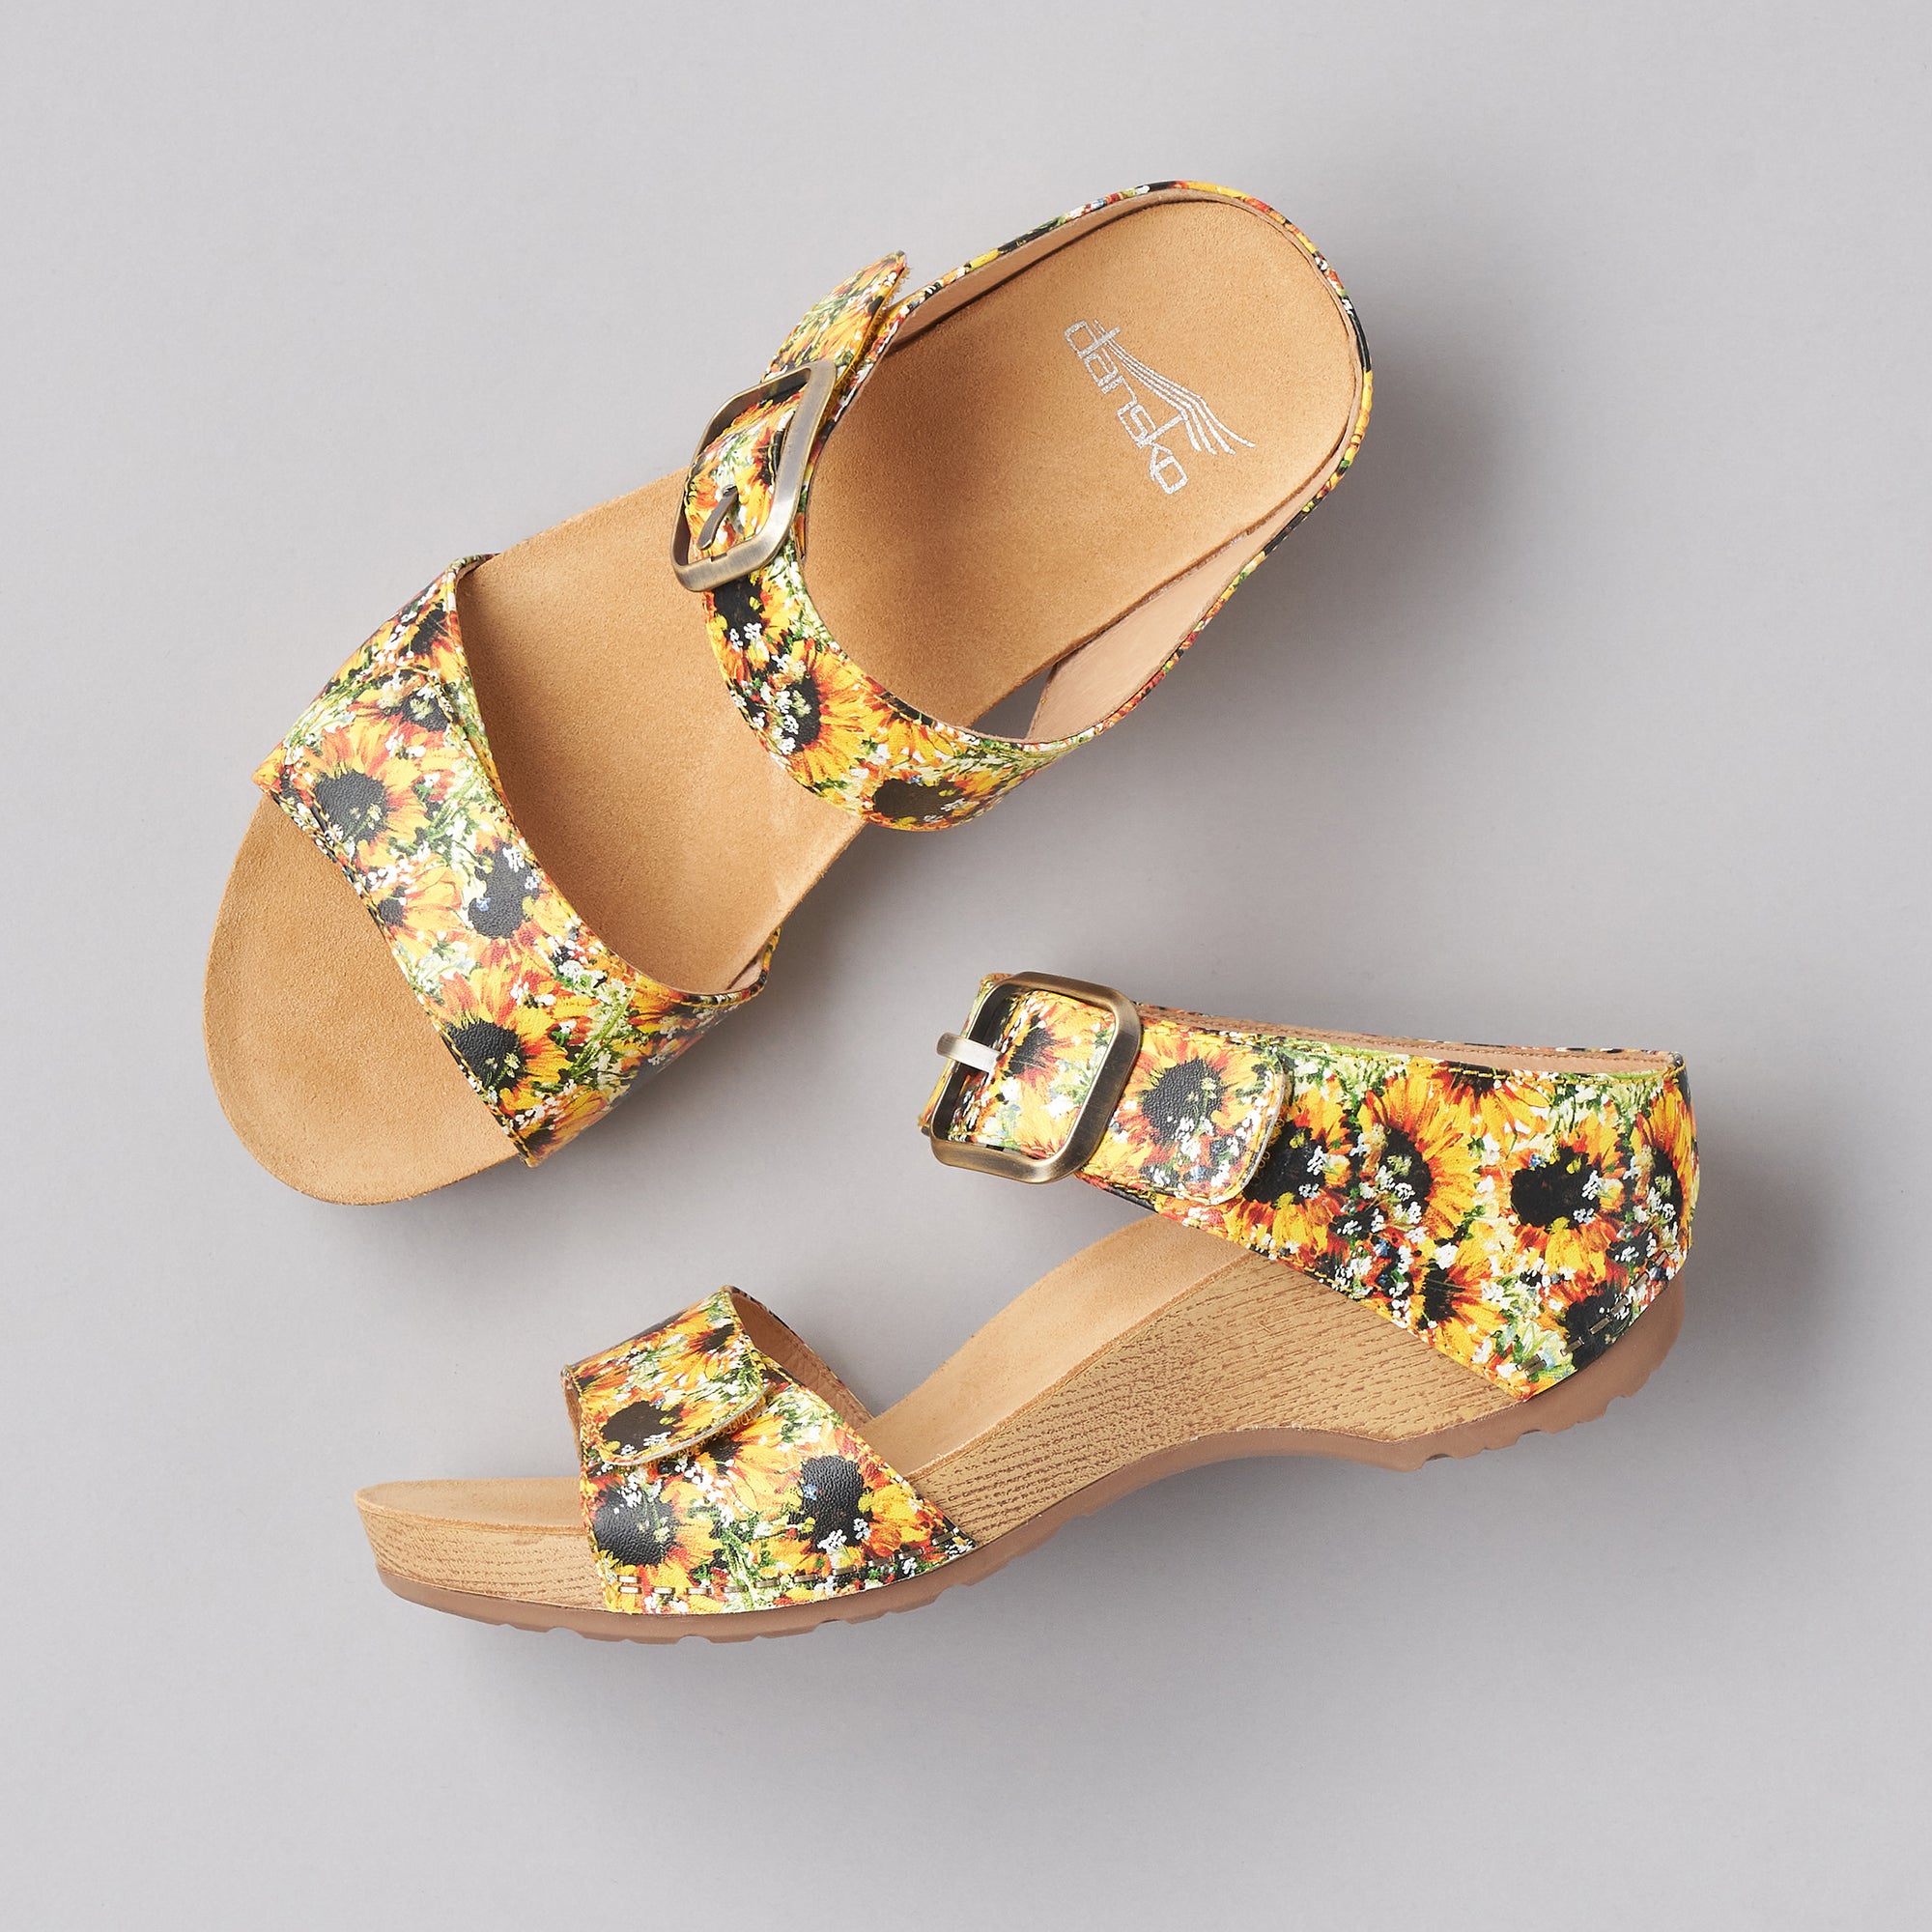 Two angles shown of the bright sunflower printed two-strap sandals.